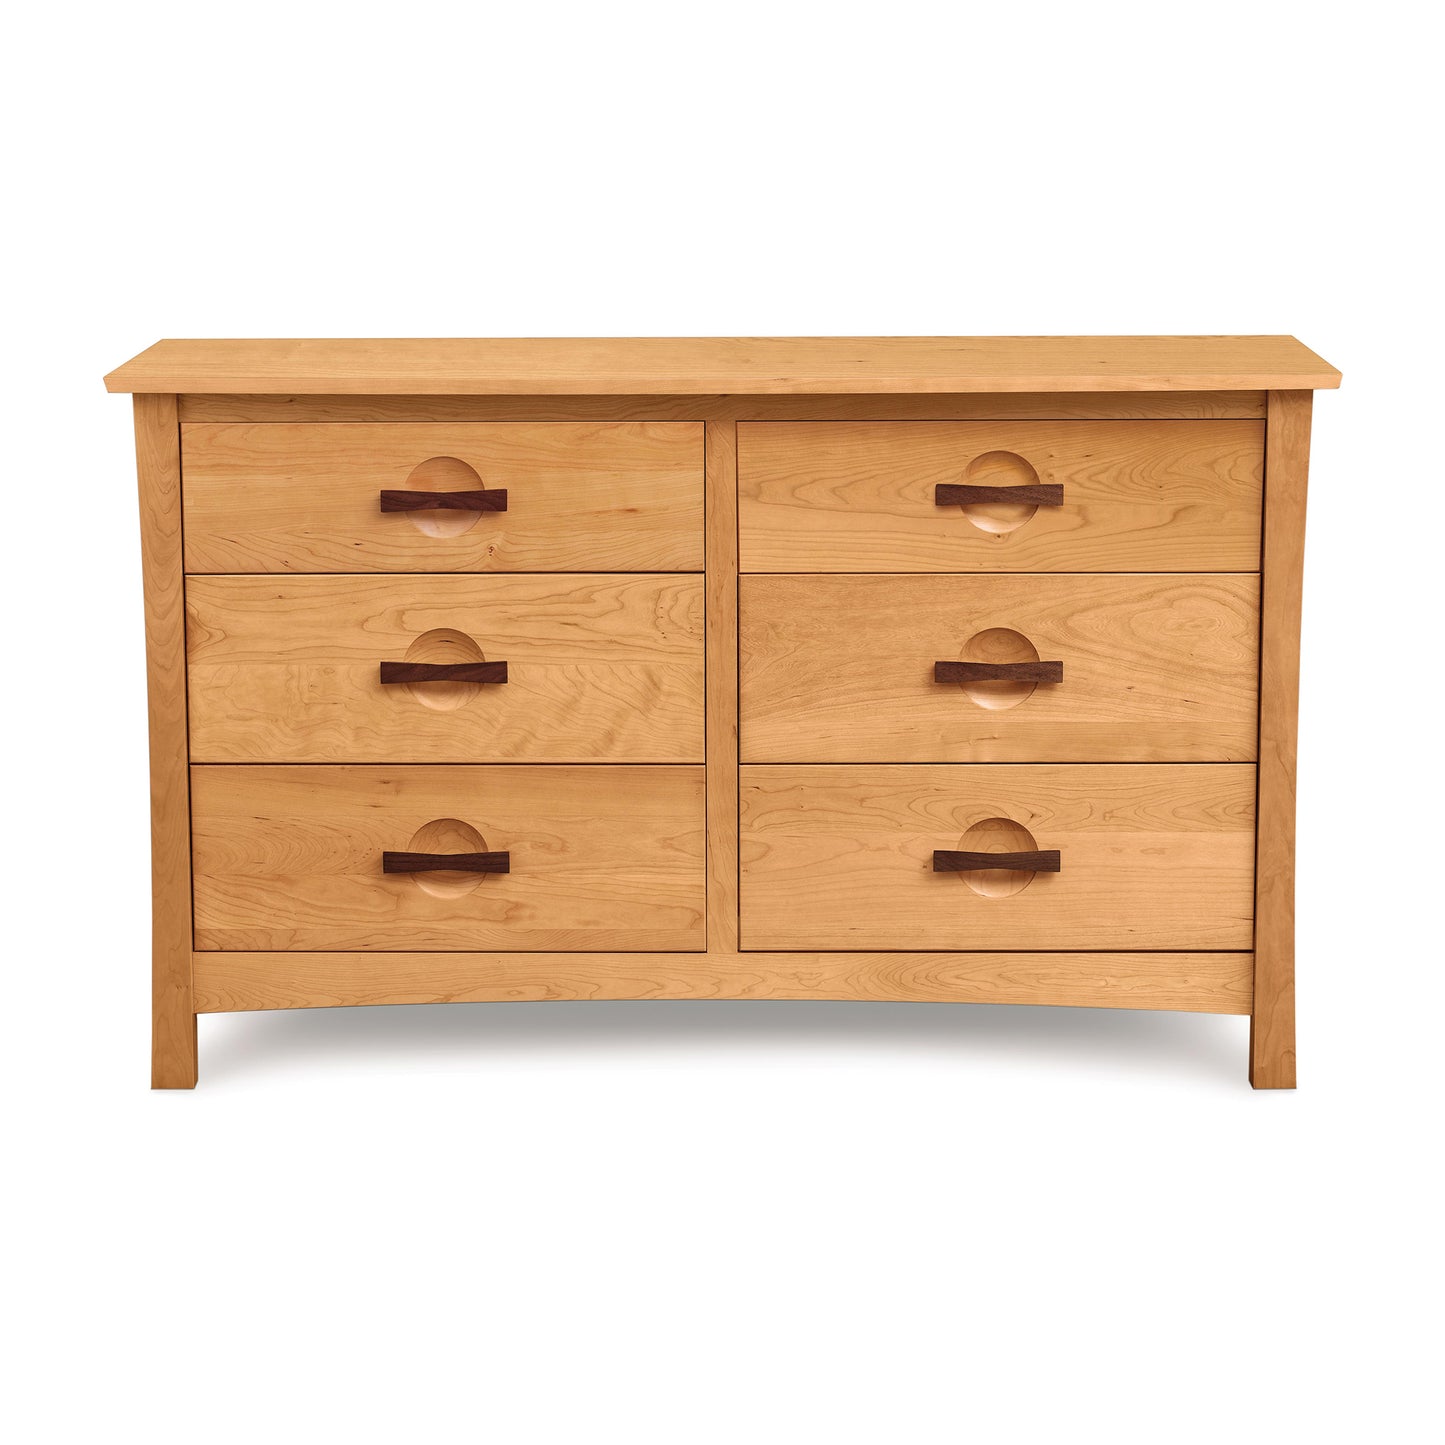 A Berkeley 6-Drawer Dresser, crafted in the American Craftsman style using cherry wood and manufactured by Copeland Furniture.